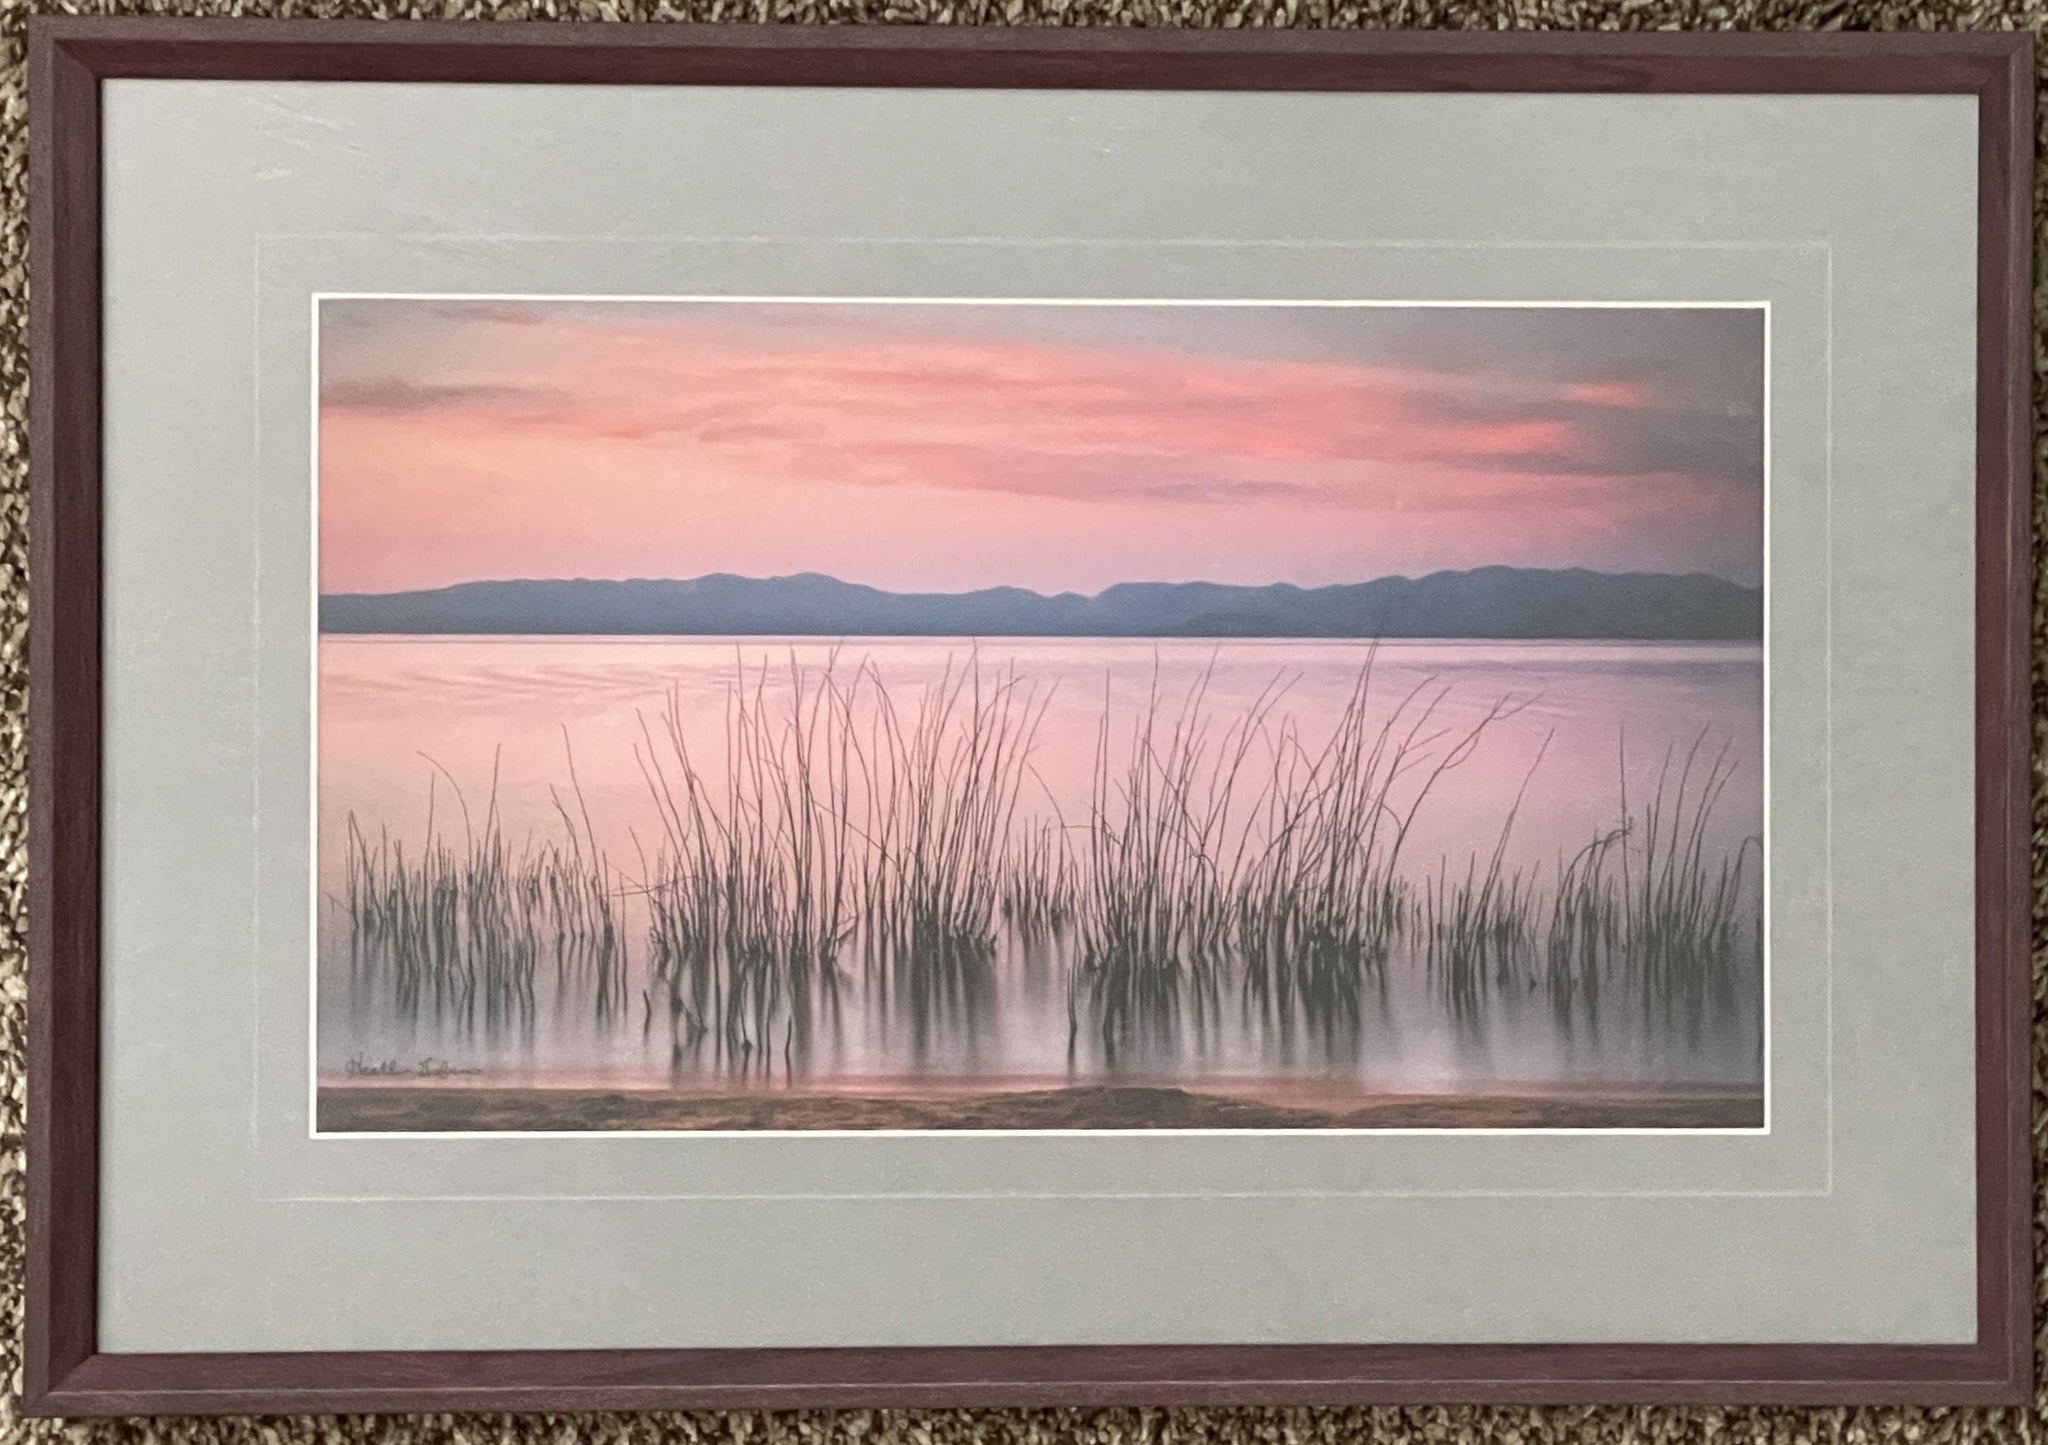 Reeds form a barrier between the shore and Lake Tahoe as the clouds and lake surface turn pink at sunset.  The mountains across the lake are visible in the background.